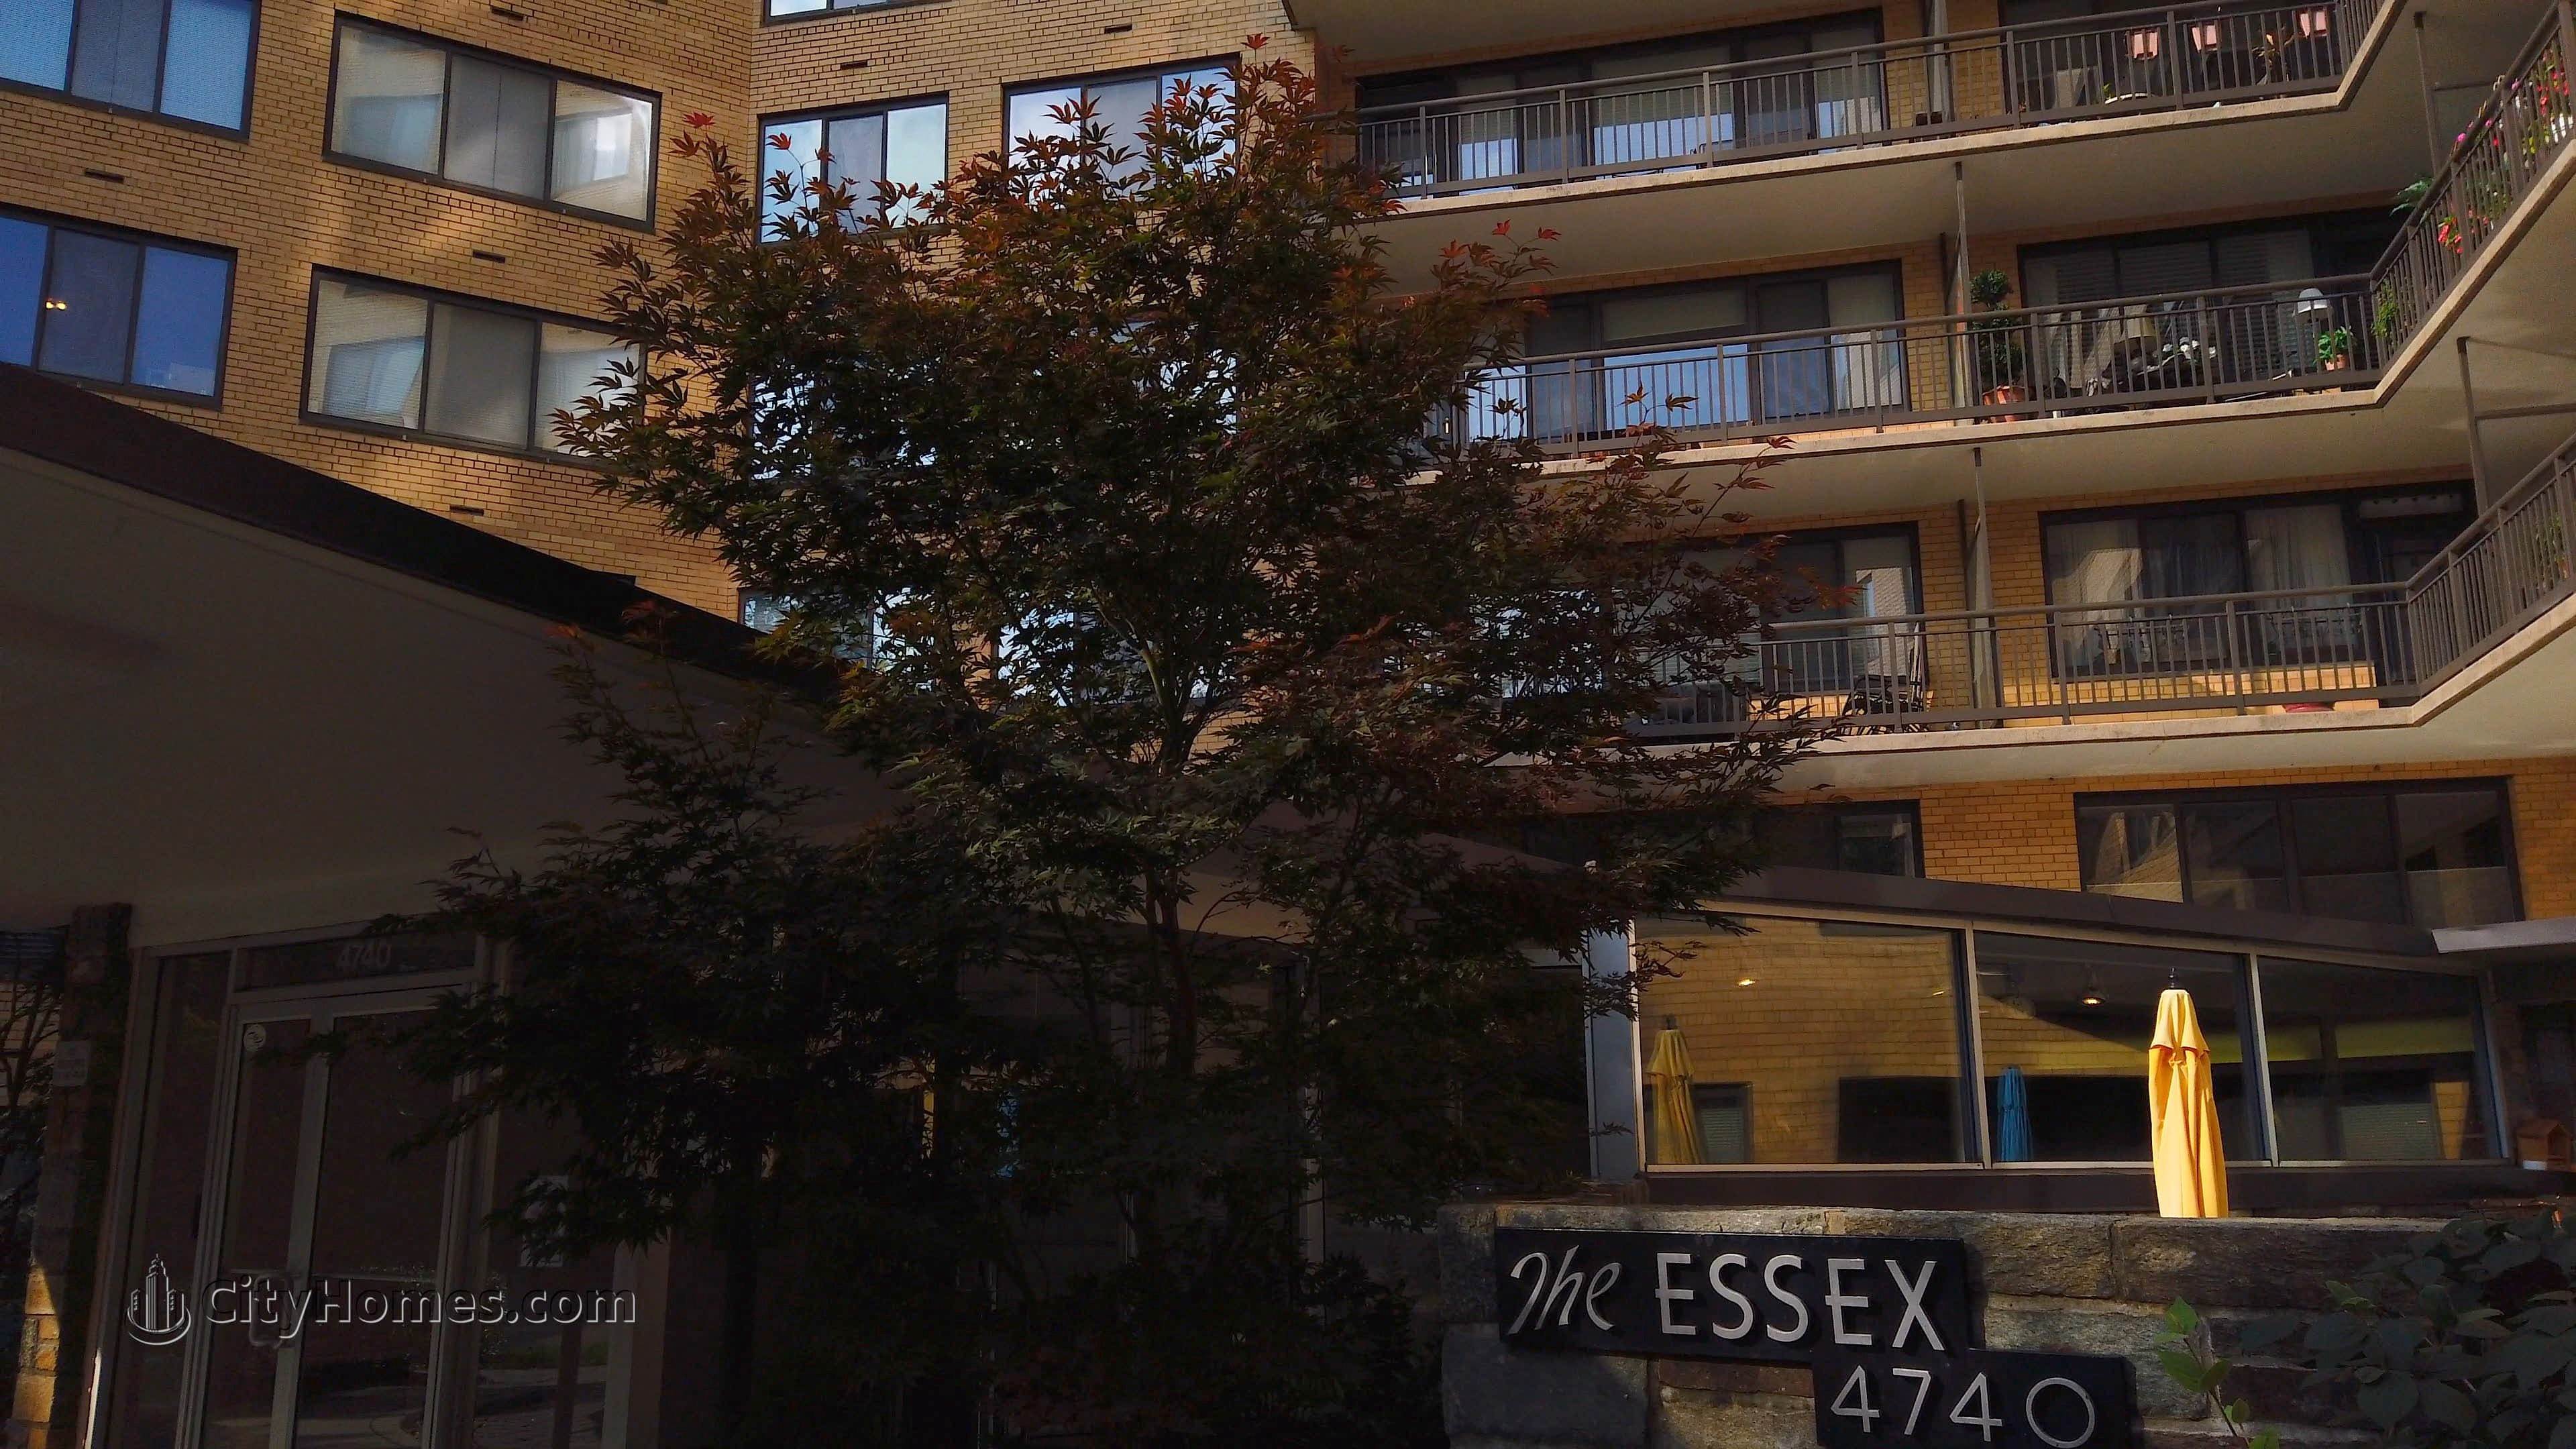 The Essex κτίριο σε 4740 Connecticut Ave NW, Wakefield, Washington, DC 20008